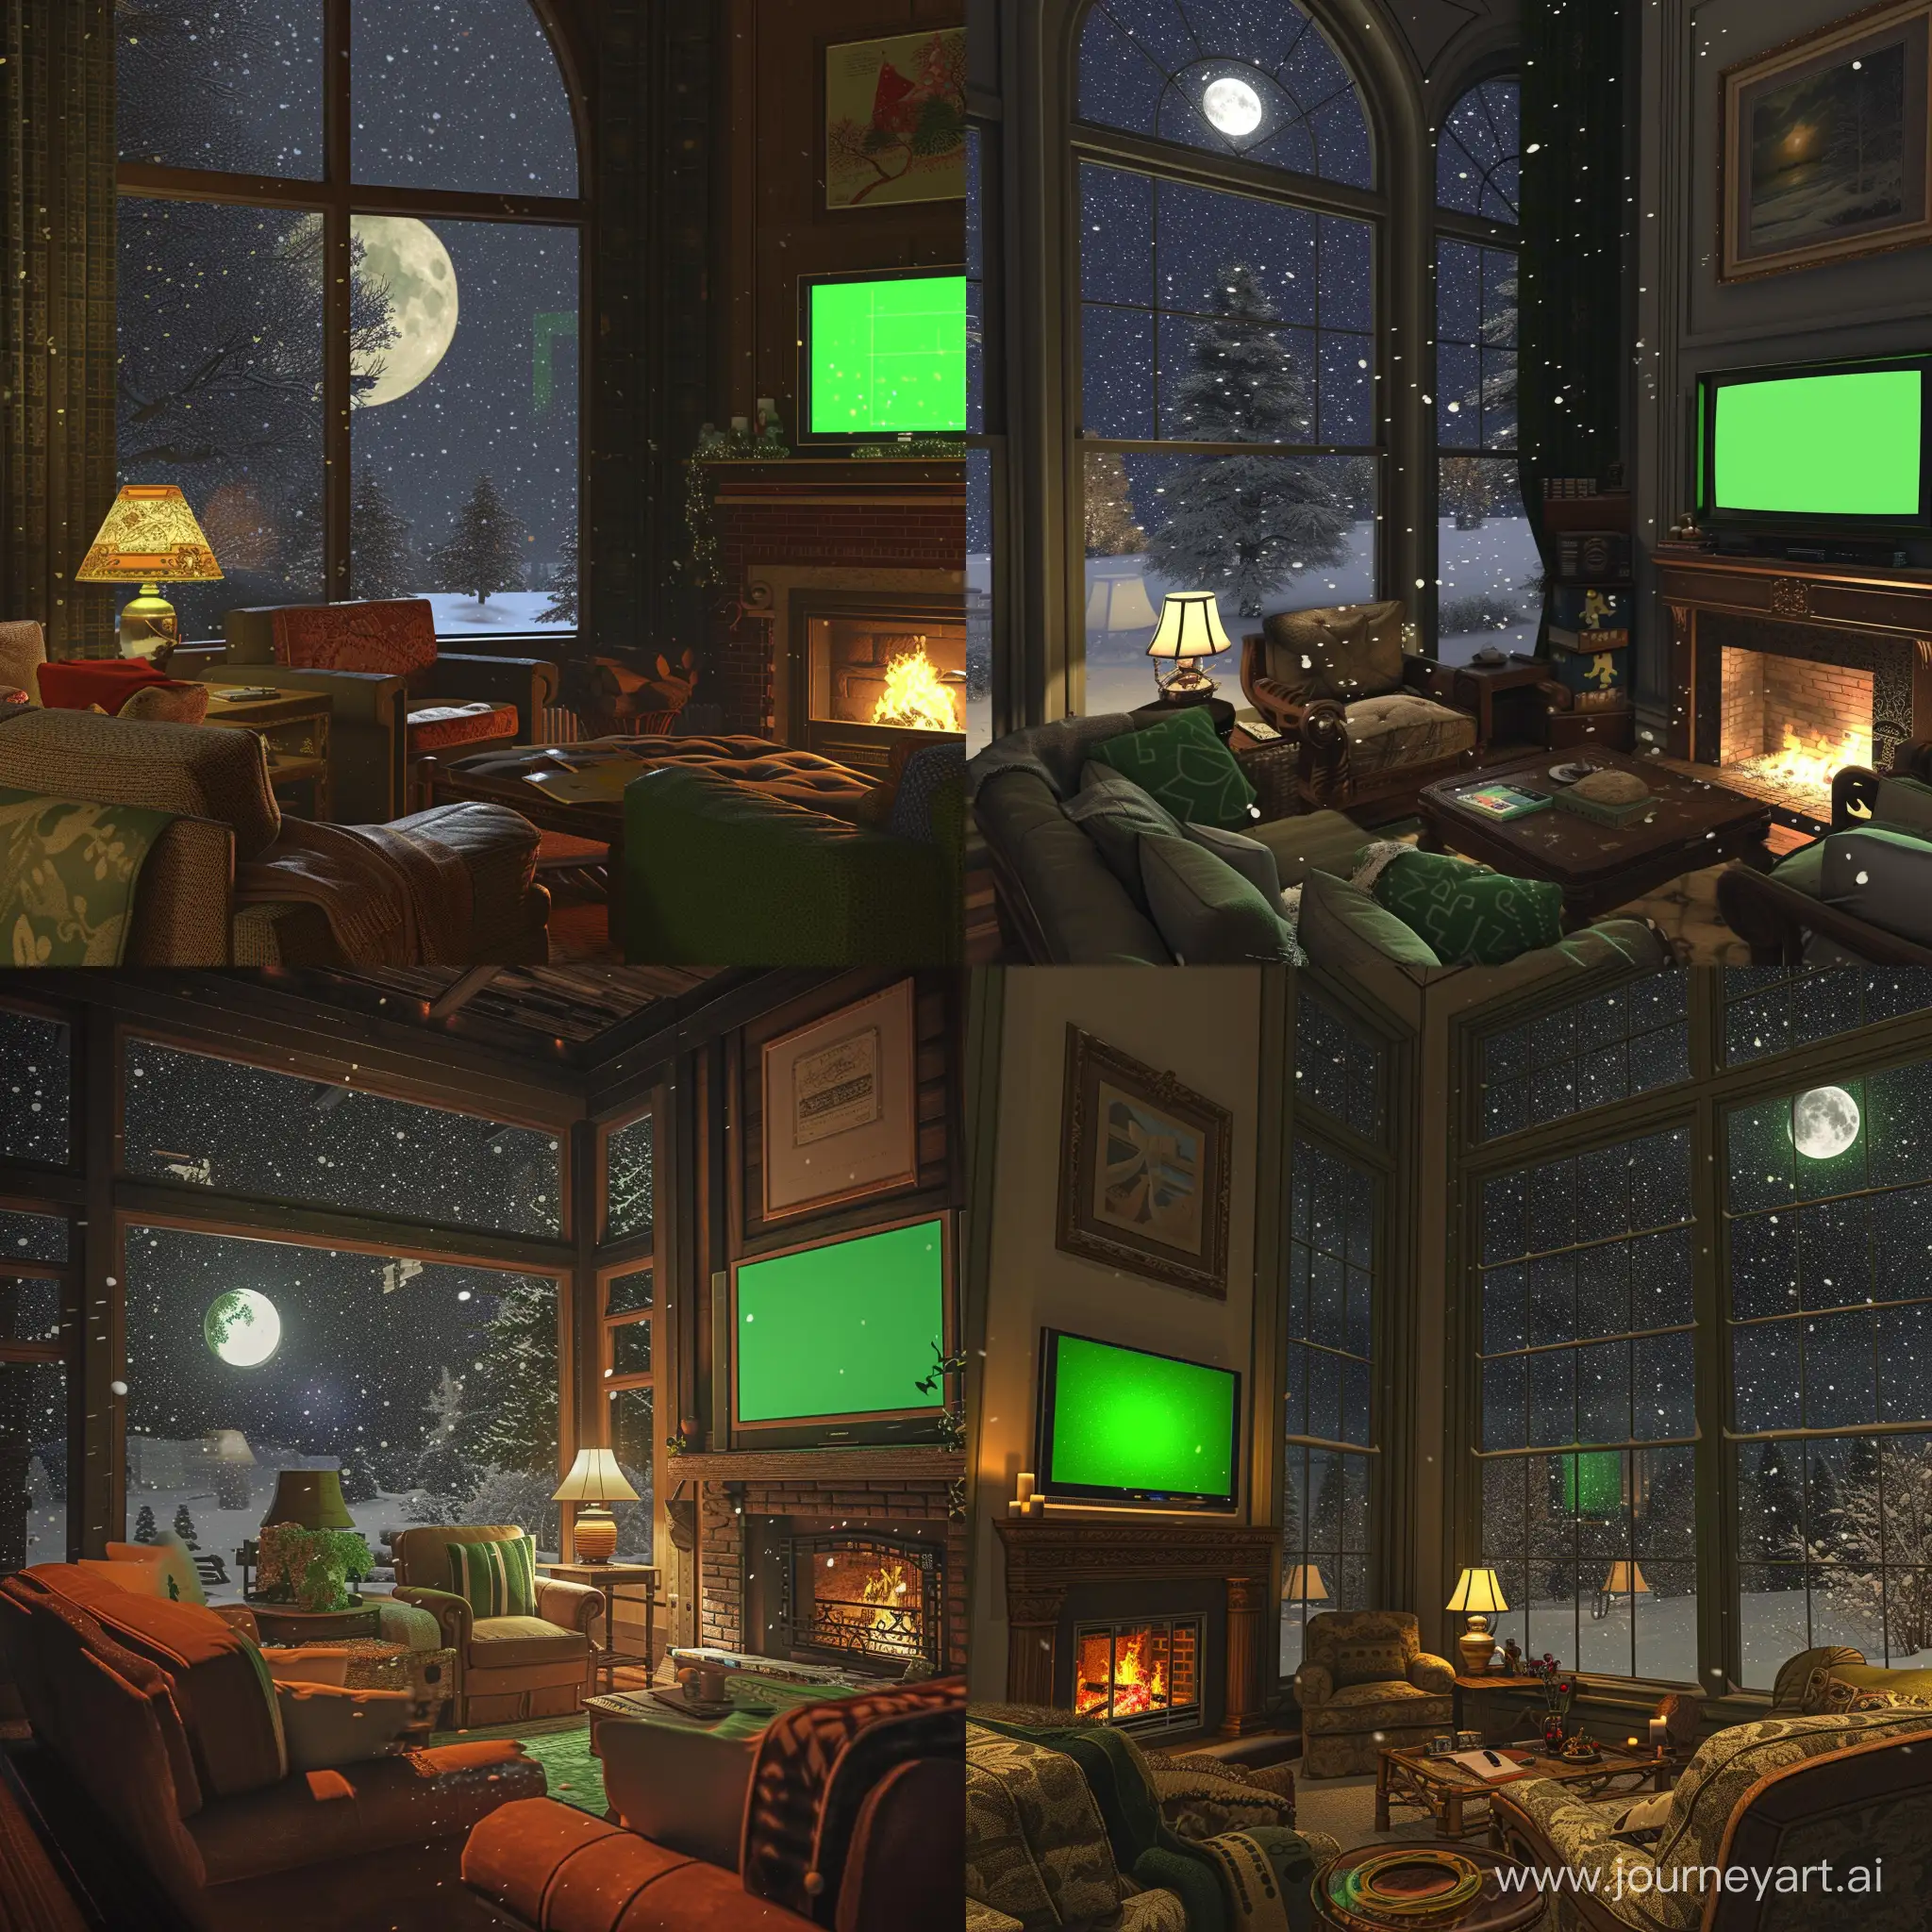 The living room is filled with furniture and a large window, creating a cozy atmosphere. At night, moonlight spills into the room from outside the window. Beyond the window, snow gently falls, and the moon is visible through the window, casting a serene and enchanting glow. Next to the fireplace, there is a television with a green screen, adding to the warm and inviting ambiance, especially during this snowy moonlit evening.